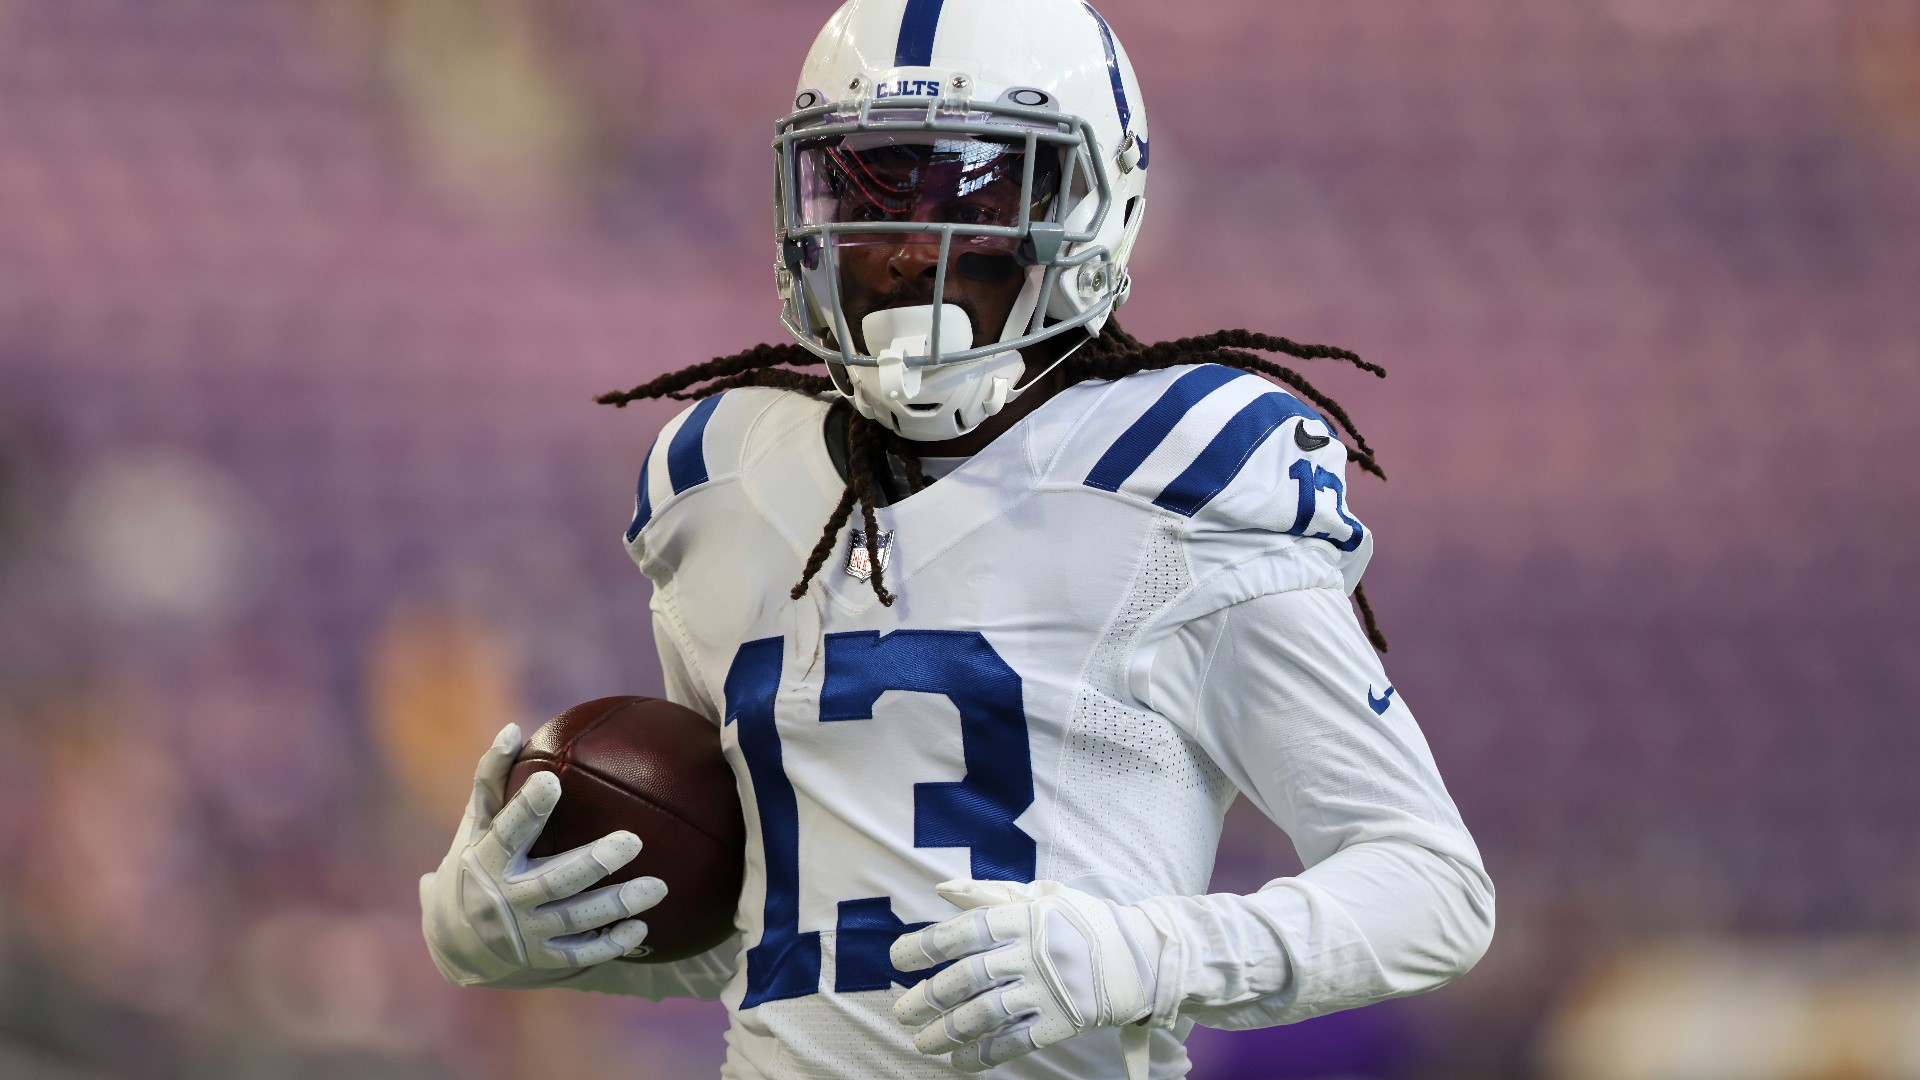 Colts receiver TY Hilton spoke to the media for the first time since returning to practice after going on the injured reserve list for a neck injury.